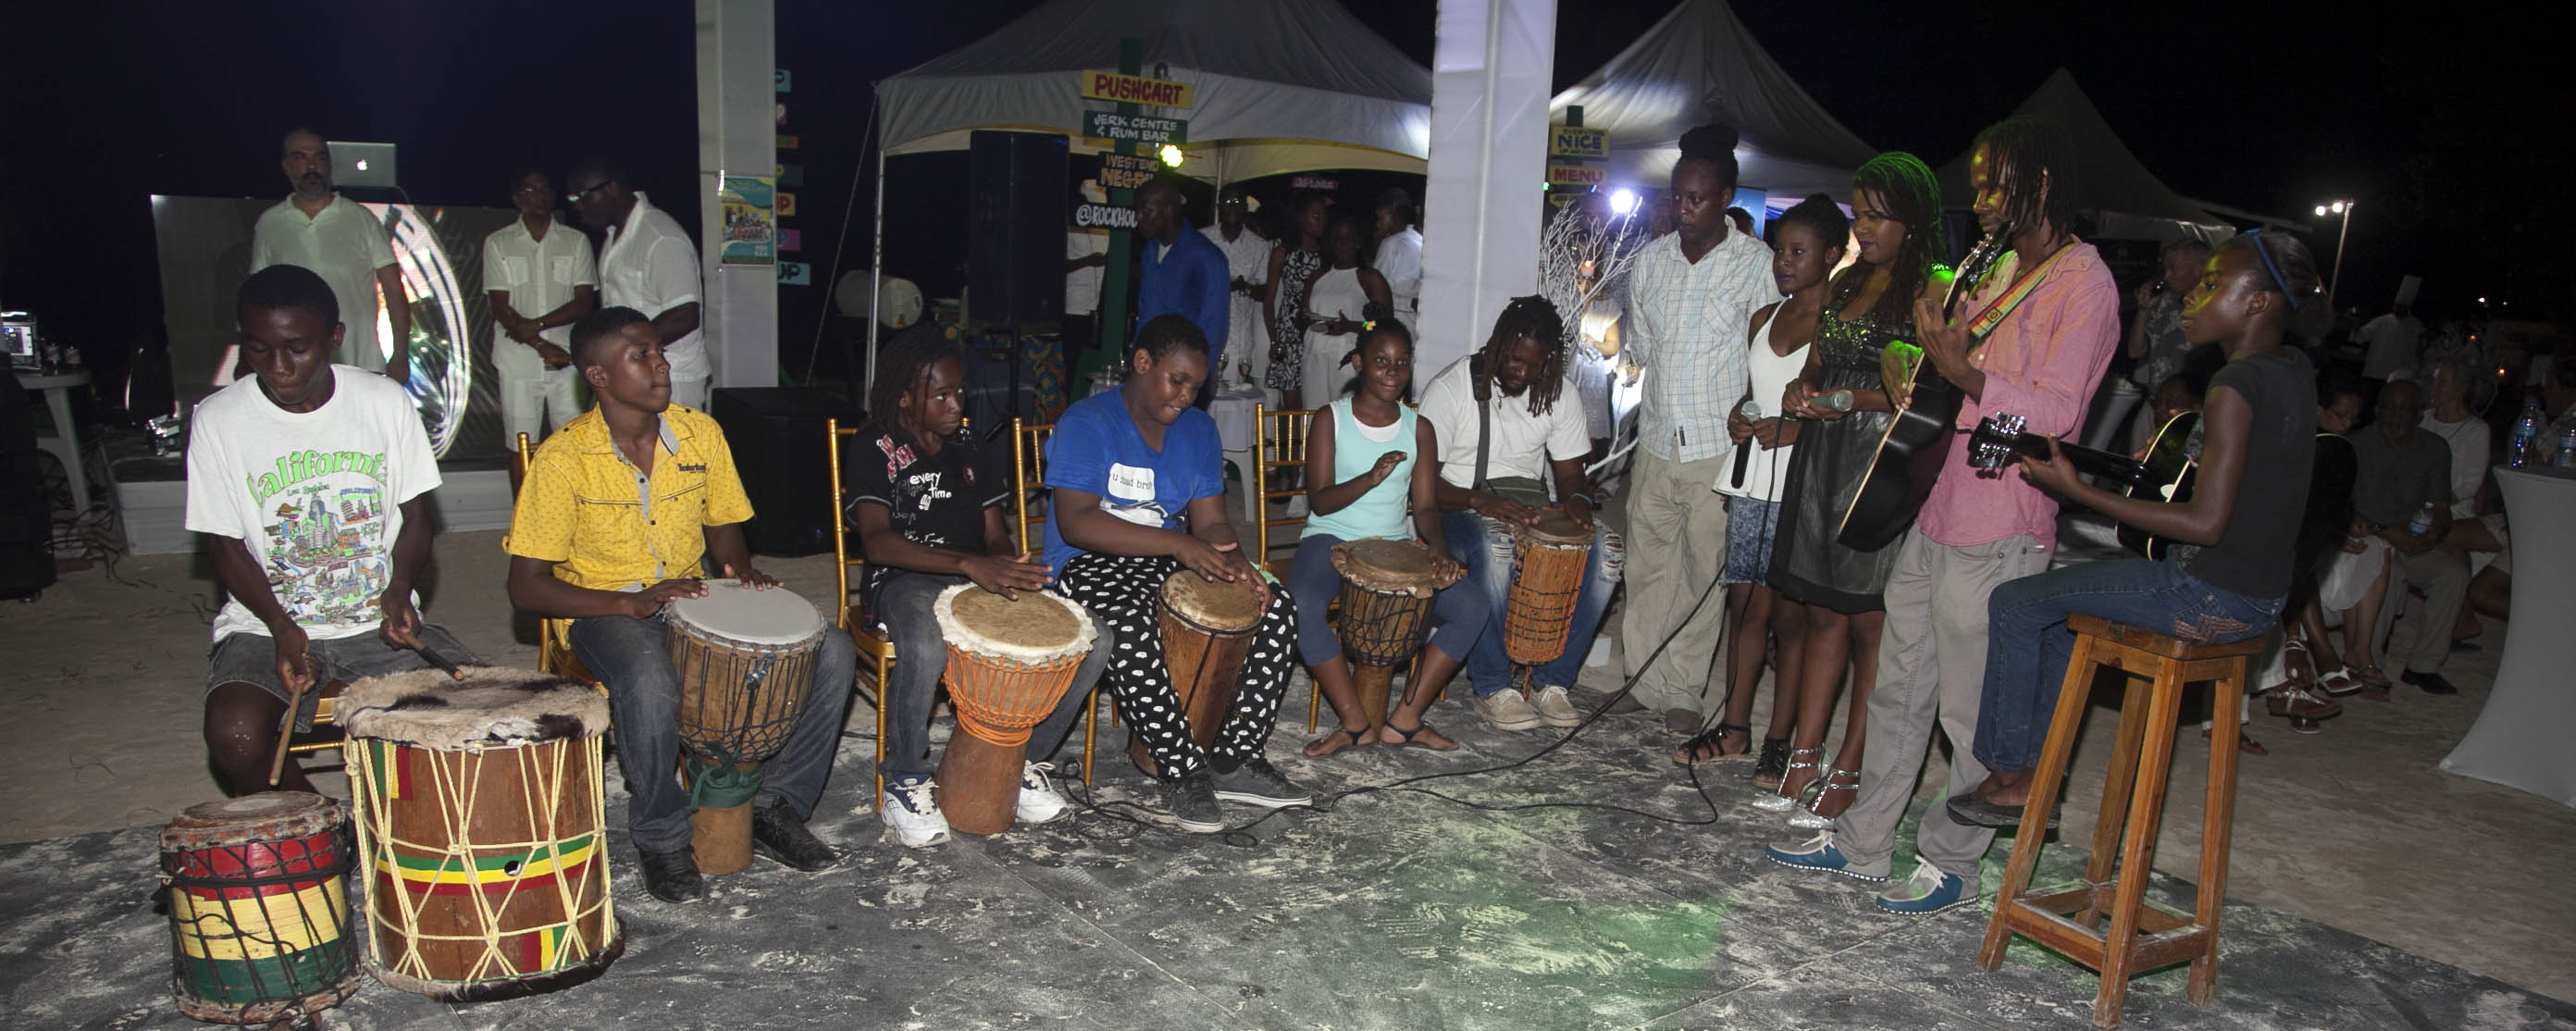 Drummers @ NCC International Food and Wine Event 2016, Negril Jamaica